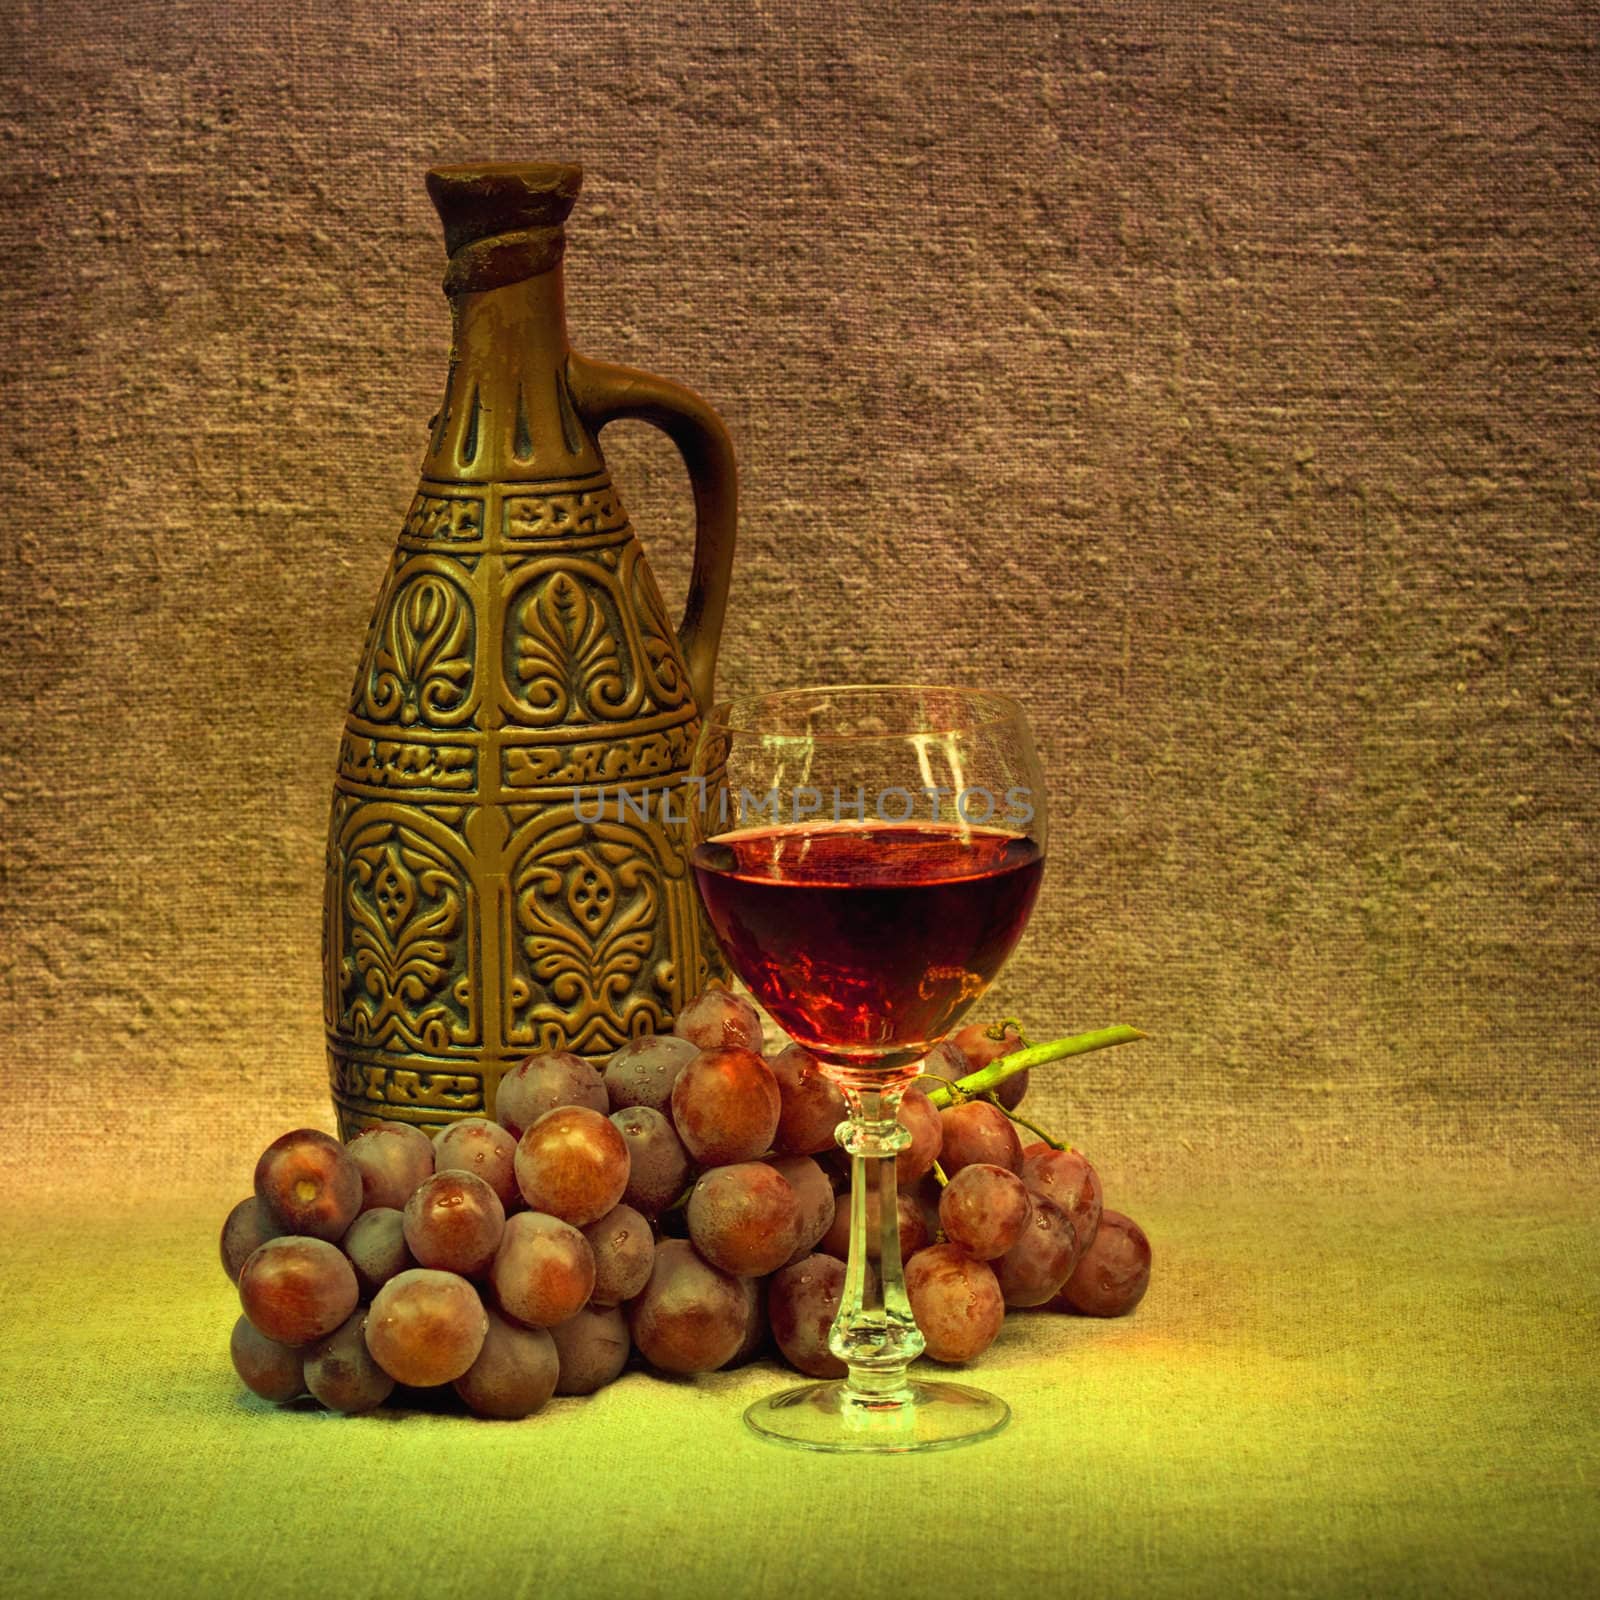 Clay bottle, glass and grapes